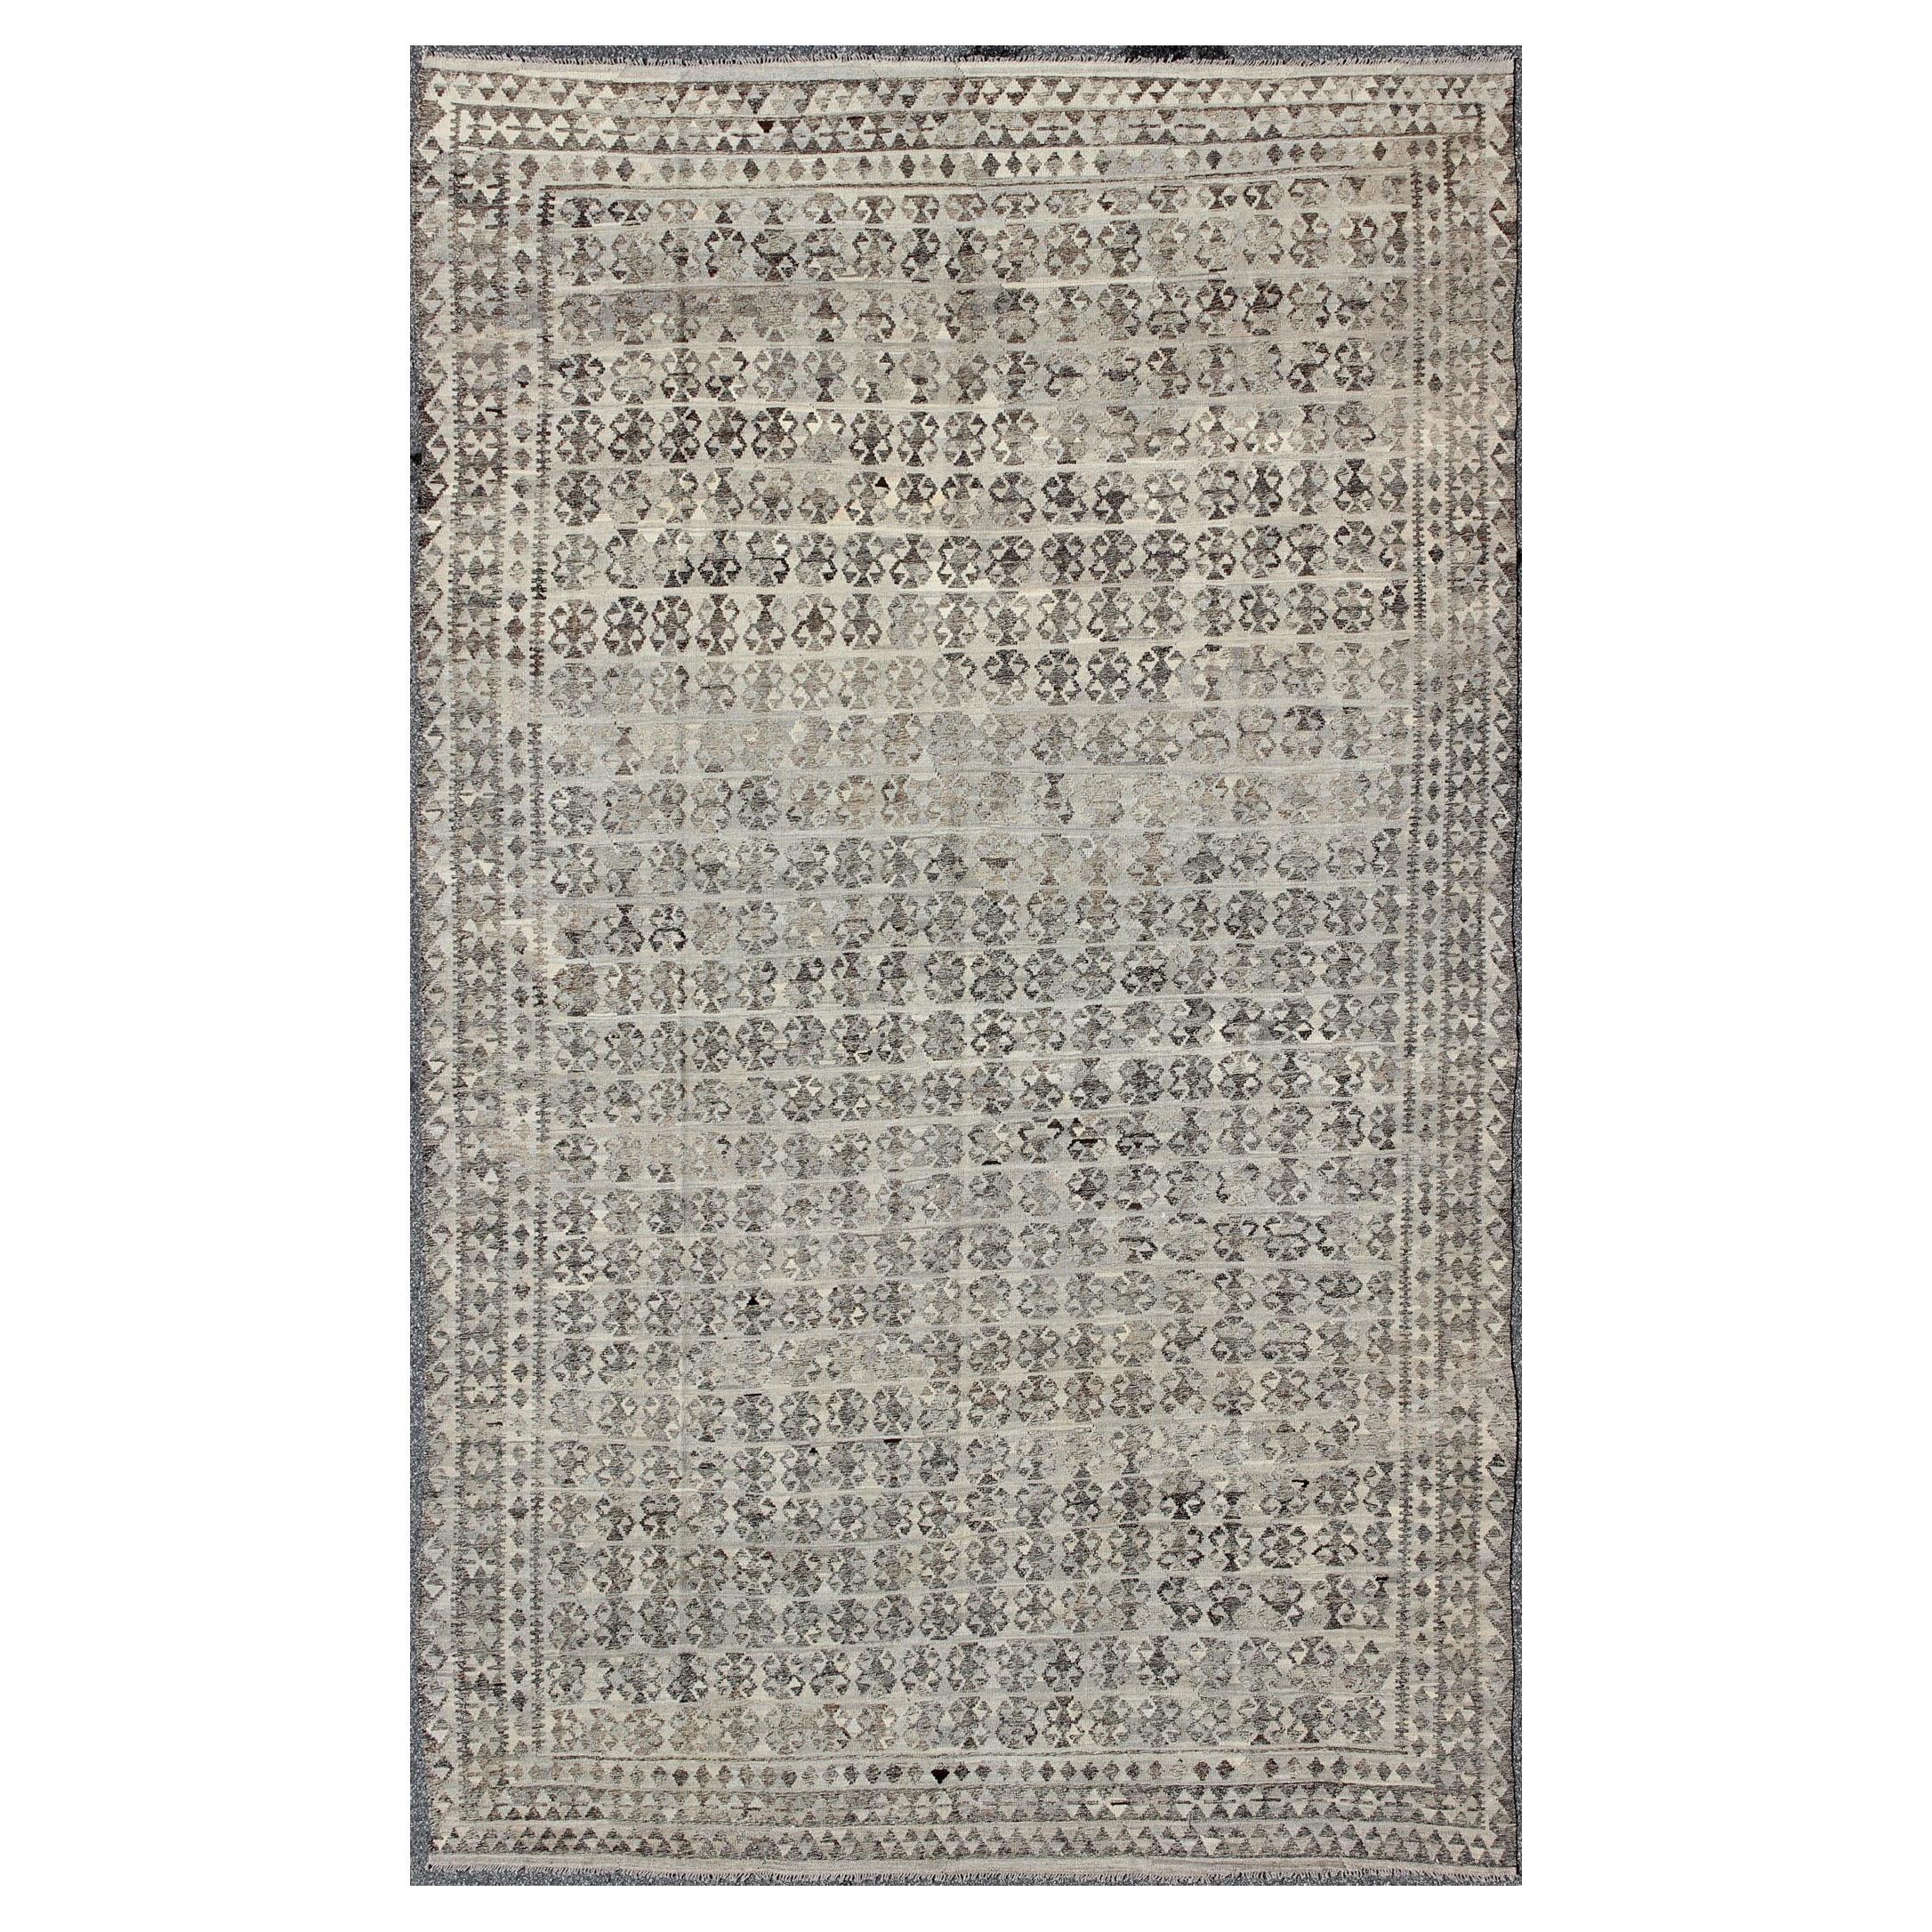 Large Kilim Rug in Shades of Gray, Silver, Silver Blue and Charcoal